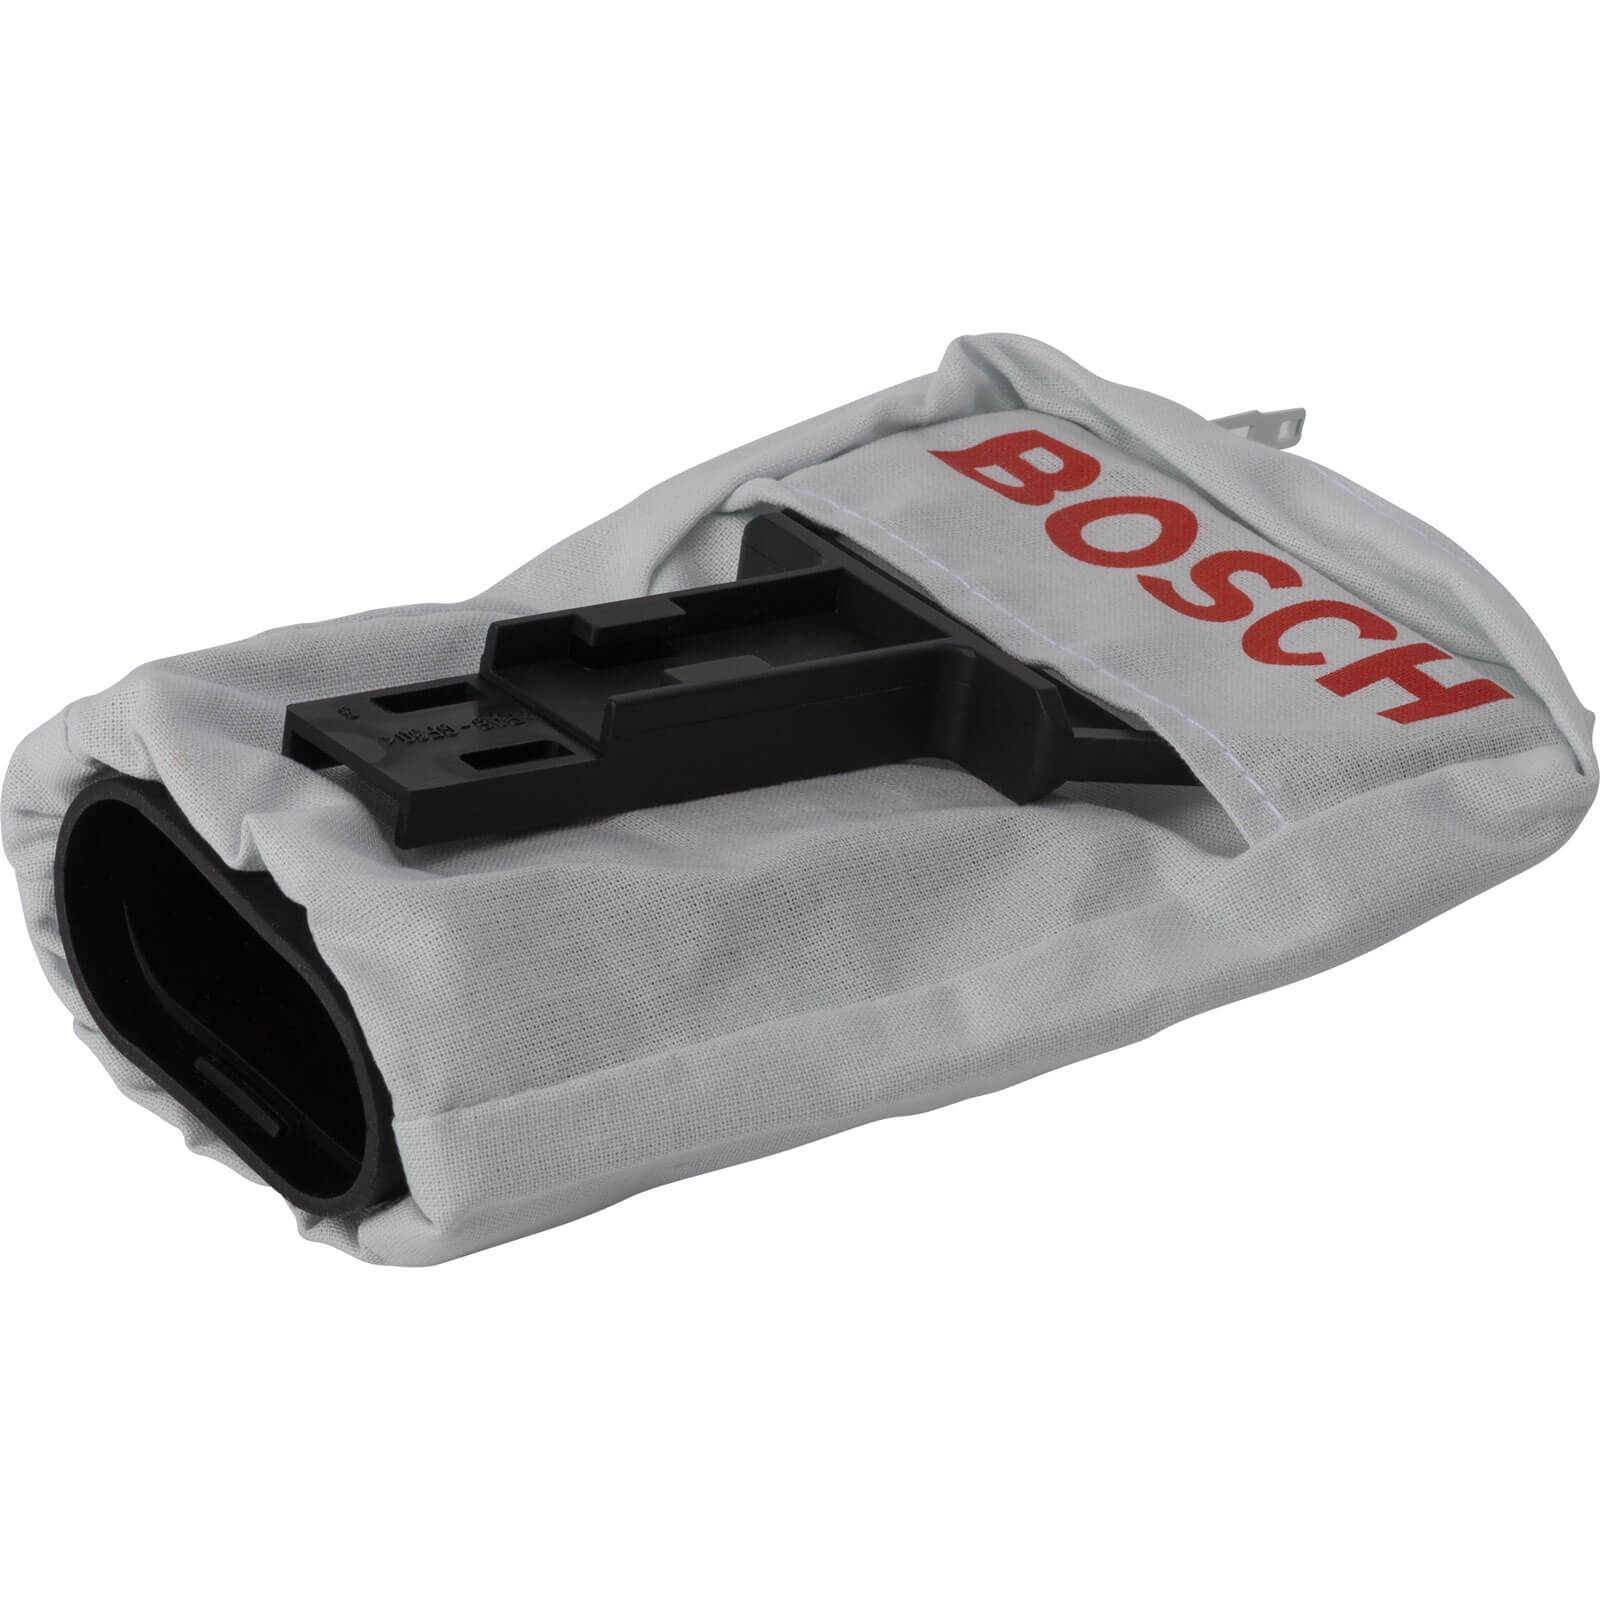 Image of Bosch Dust Bag for GSS 230 and 280 Orbital Sanders